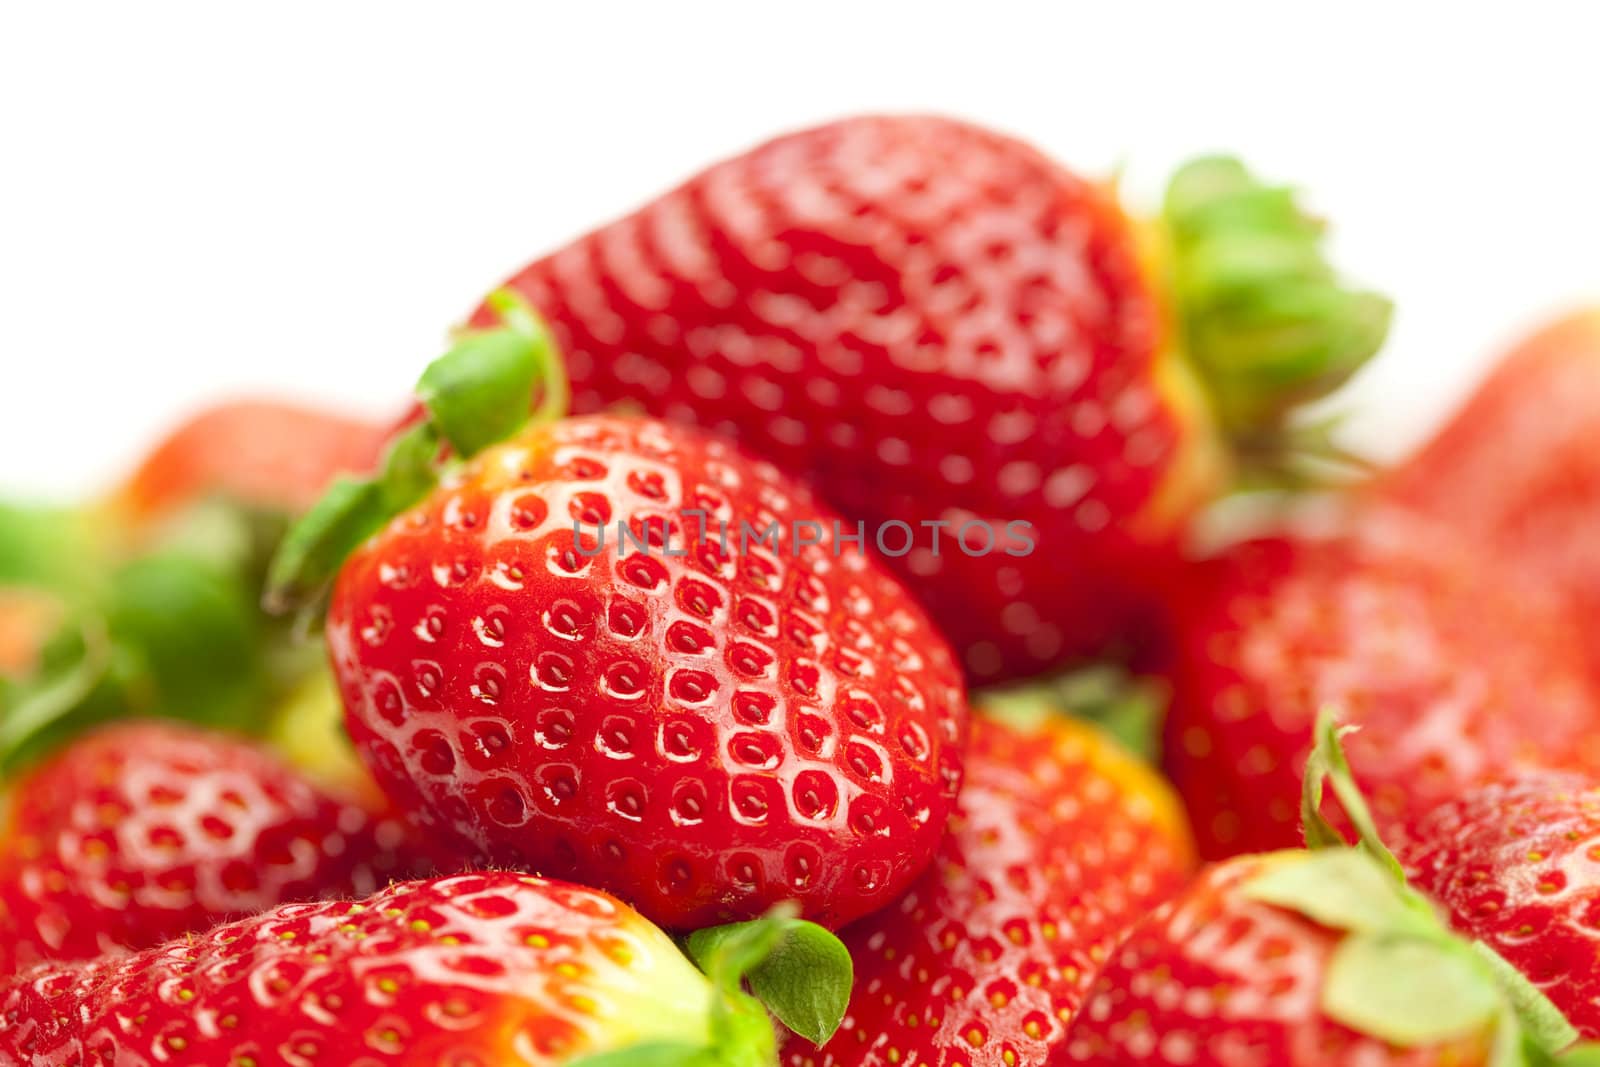 juicy strawberries isolated on white by jannyjus